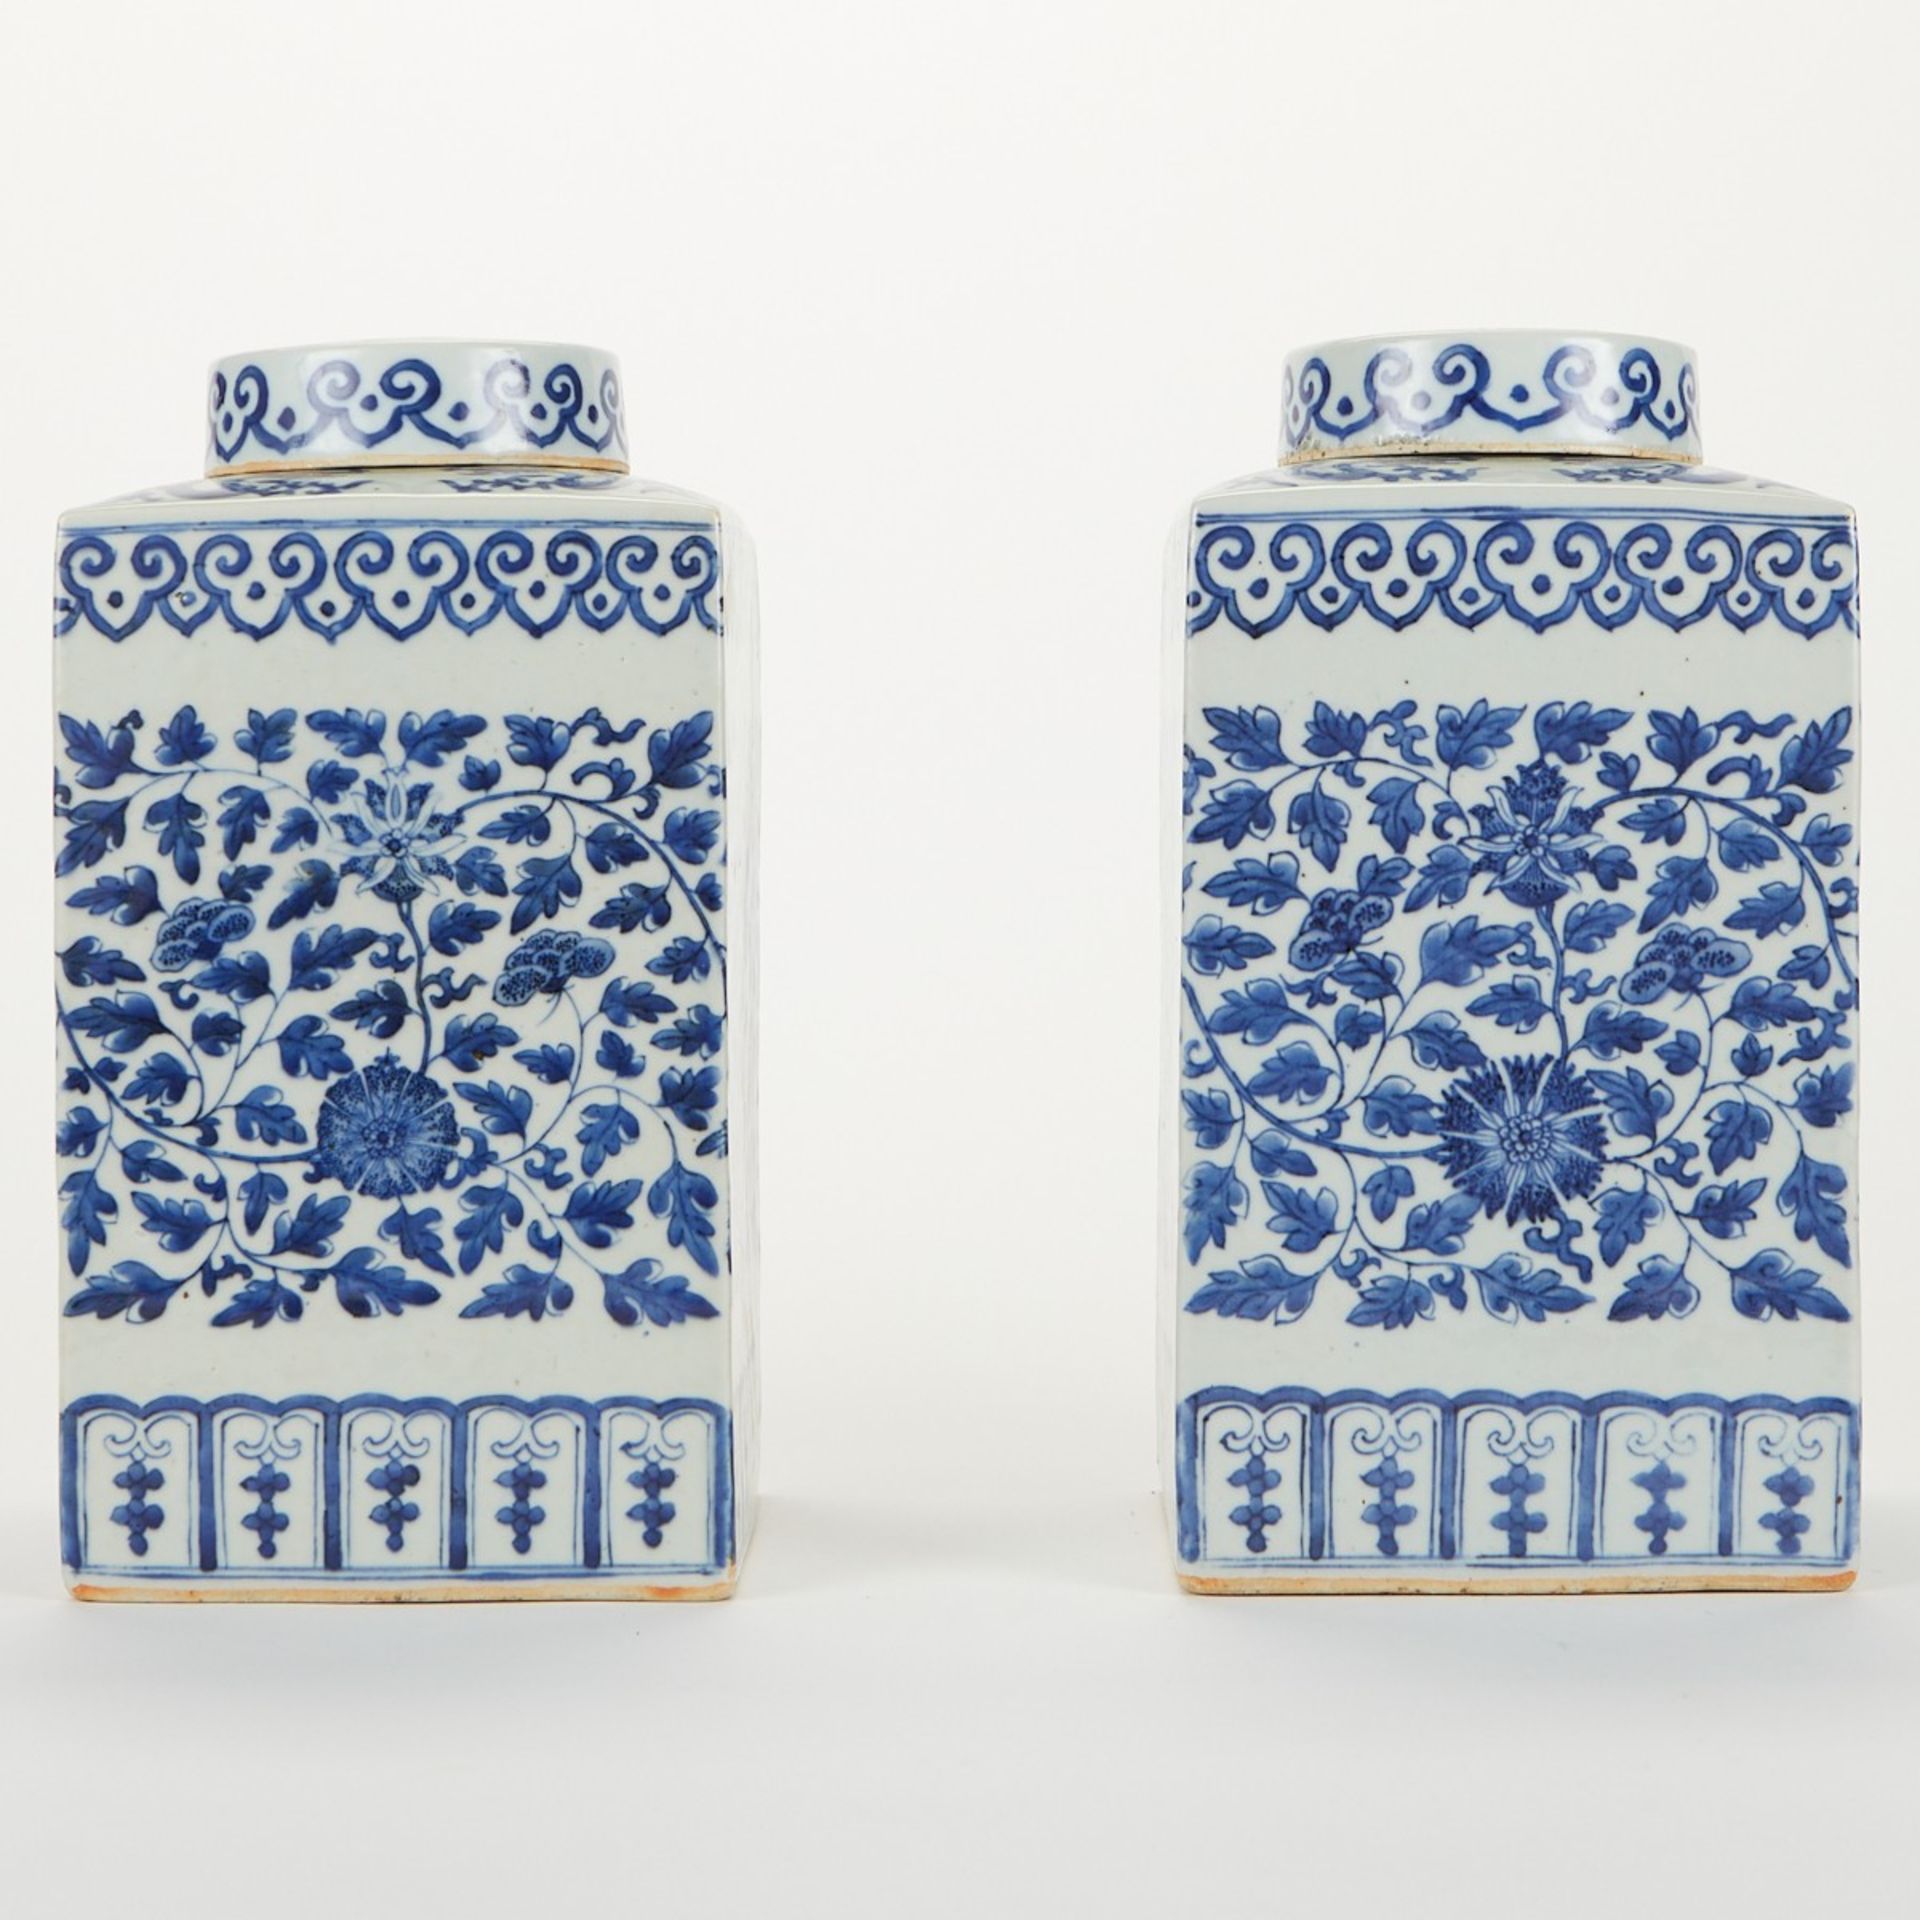 Pair of Chinese Export Blue & White Porcelain Ginger Jars - Image 3 of 9